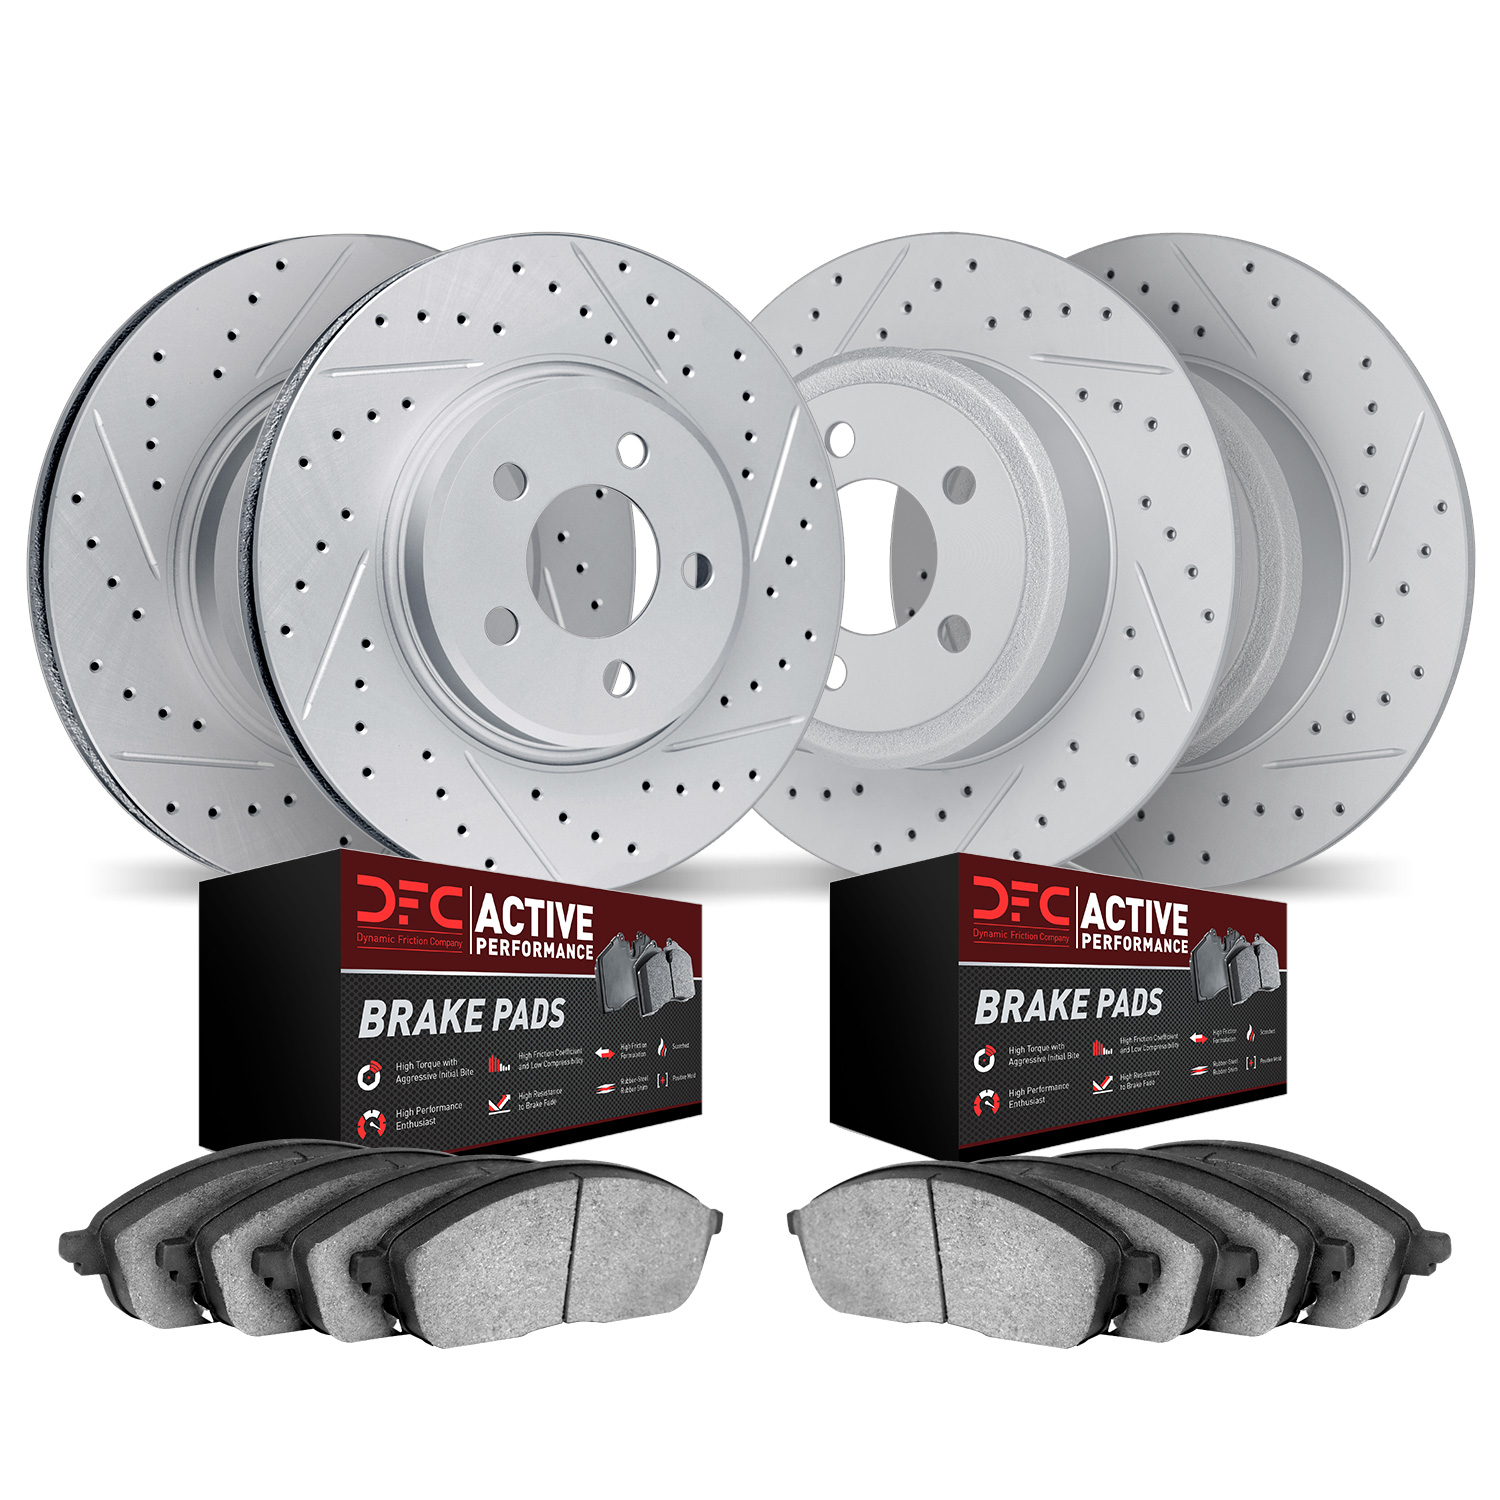 2704-59049 Geoperformance Drilled/Slotted Brake Rotors with Active Performance Pads Kit, 2003-2008 Acura/Honda, Position: Front